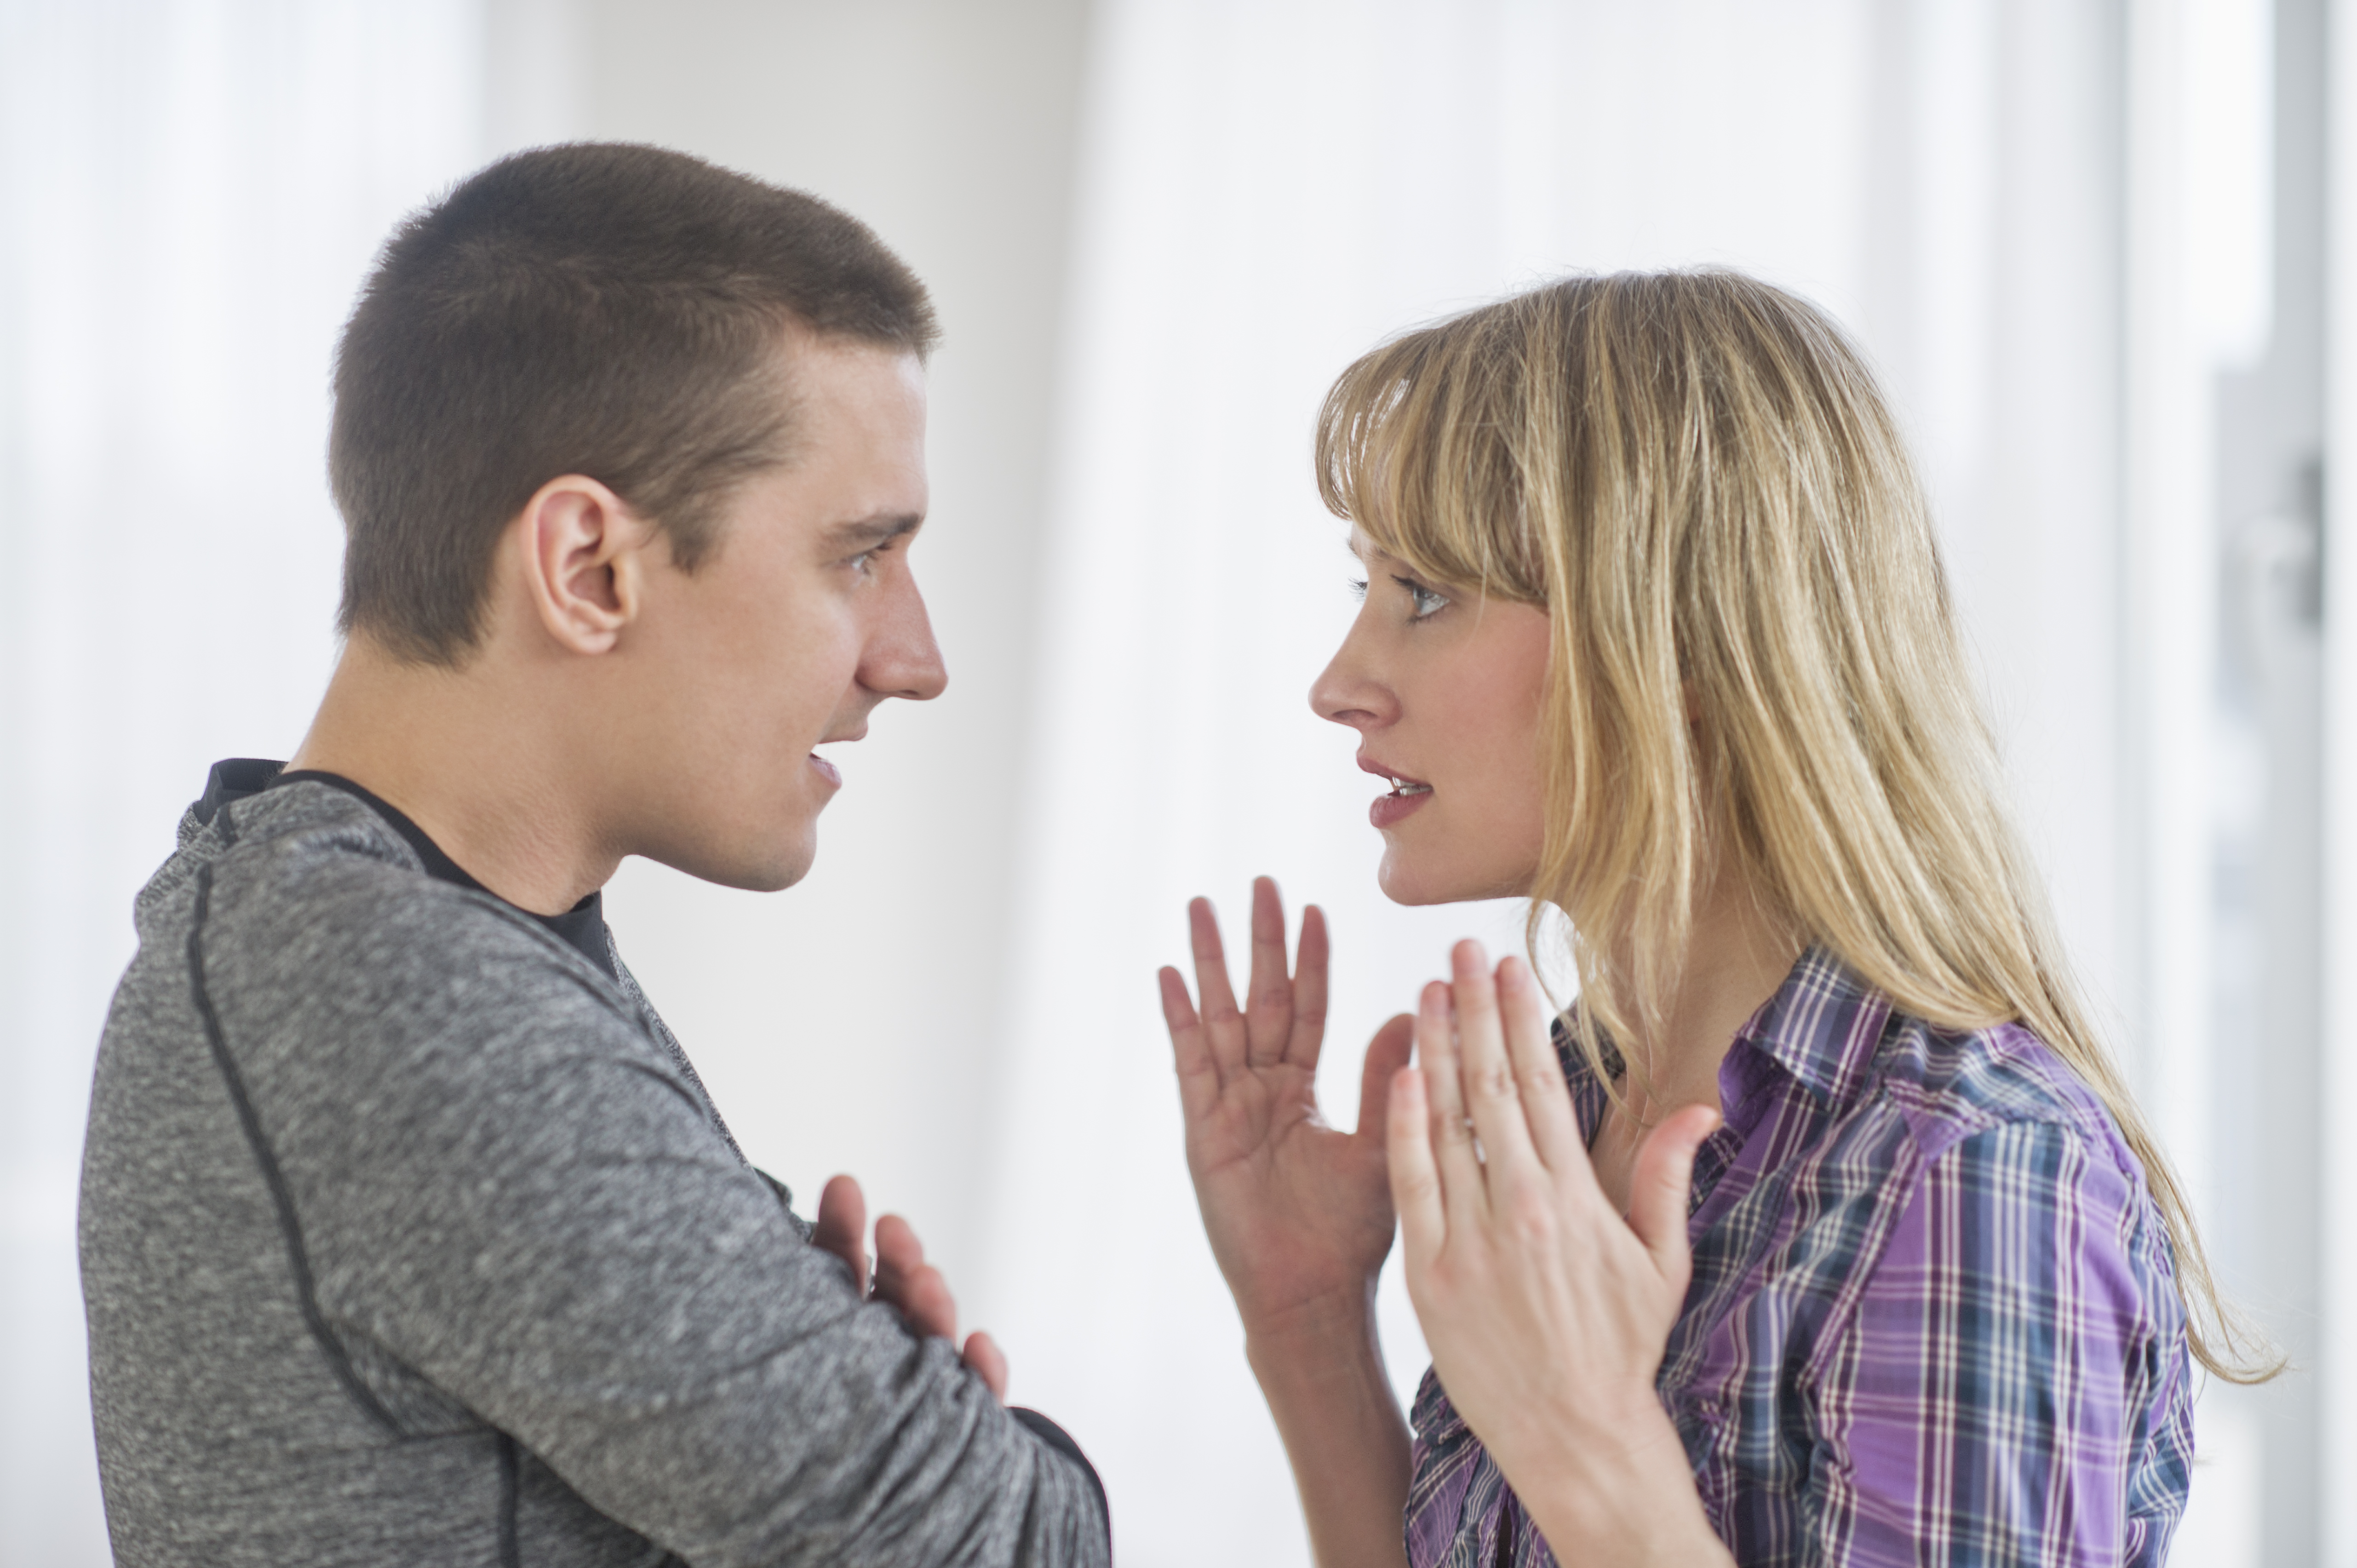 USA, New Jersey, Jersey City, Couple arguing | Source: Getty Images